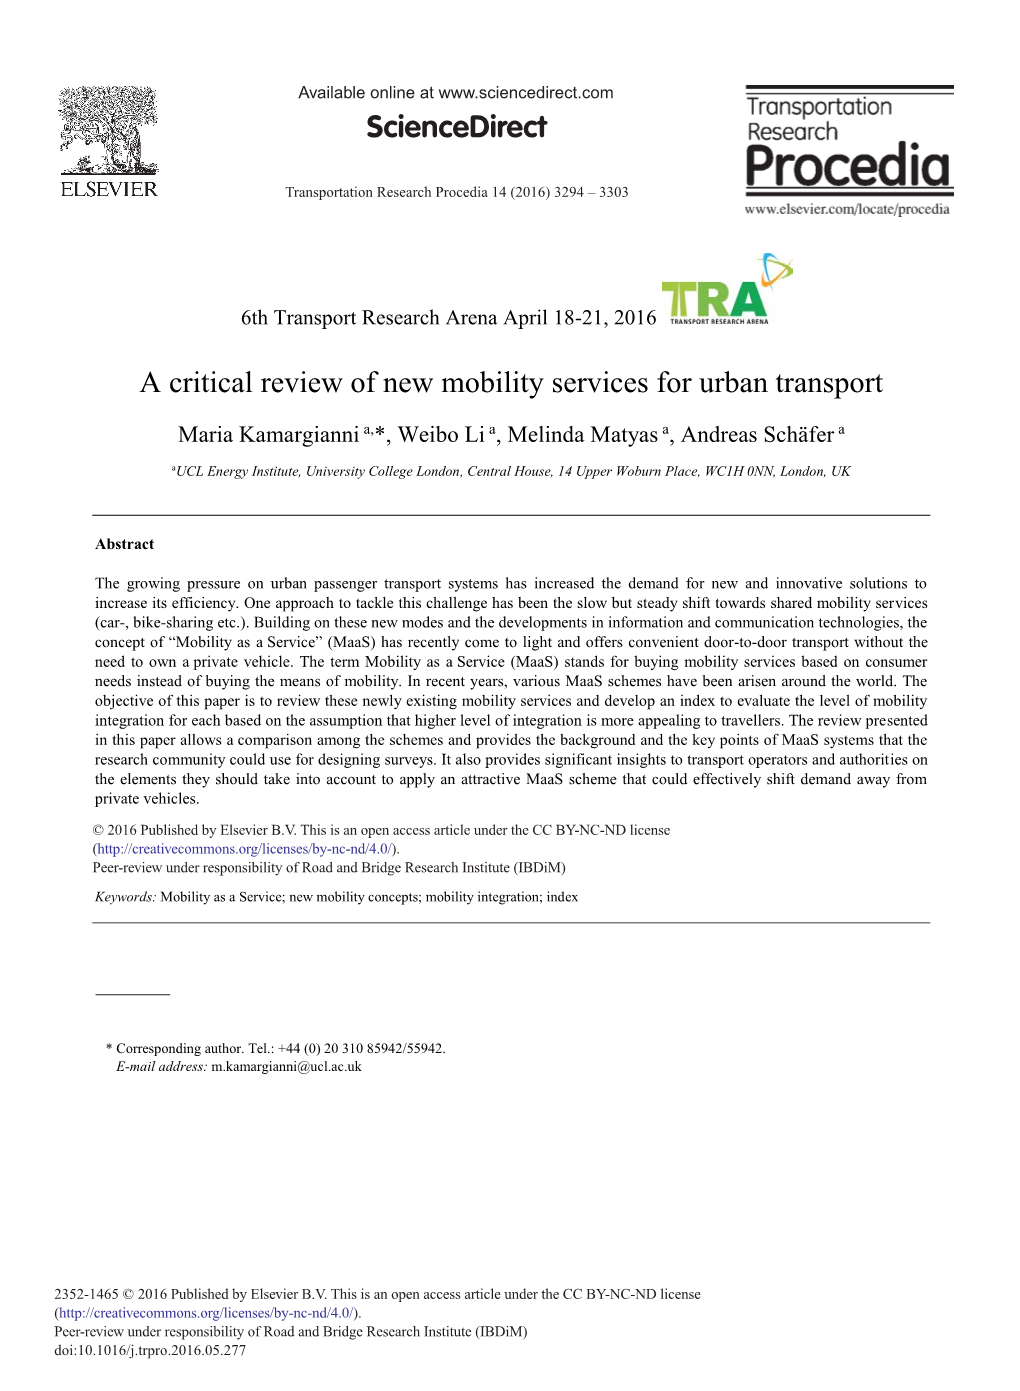 A Critical Review of New Mobility Services for Urban Transport